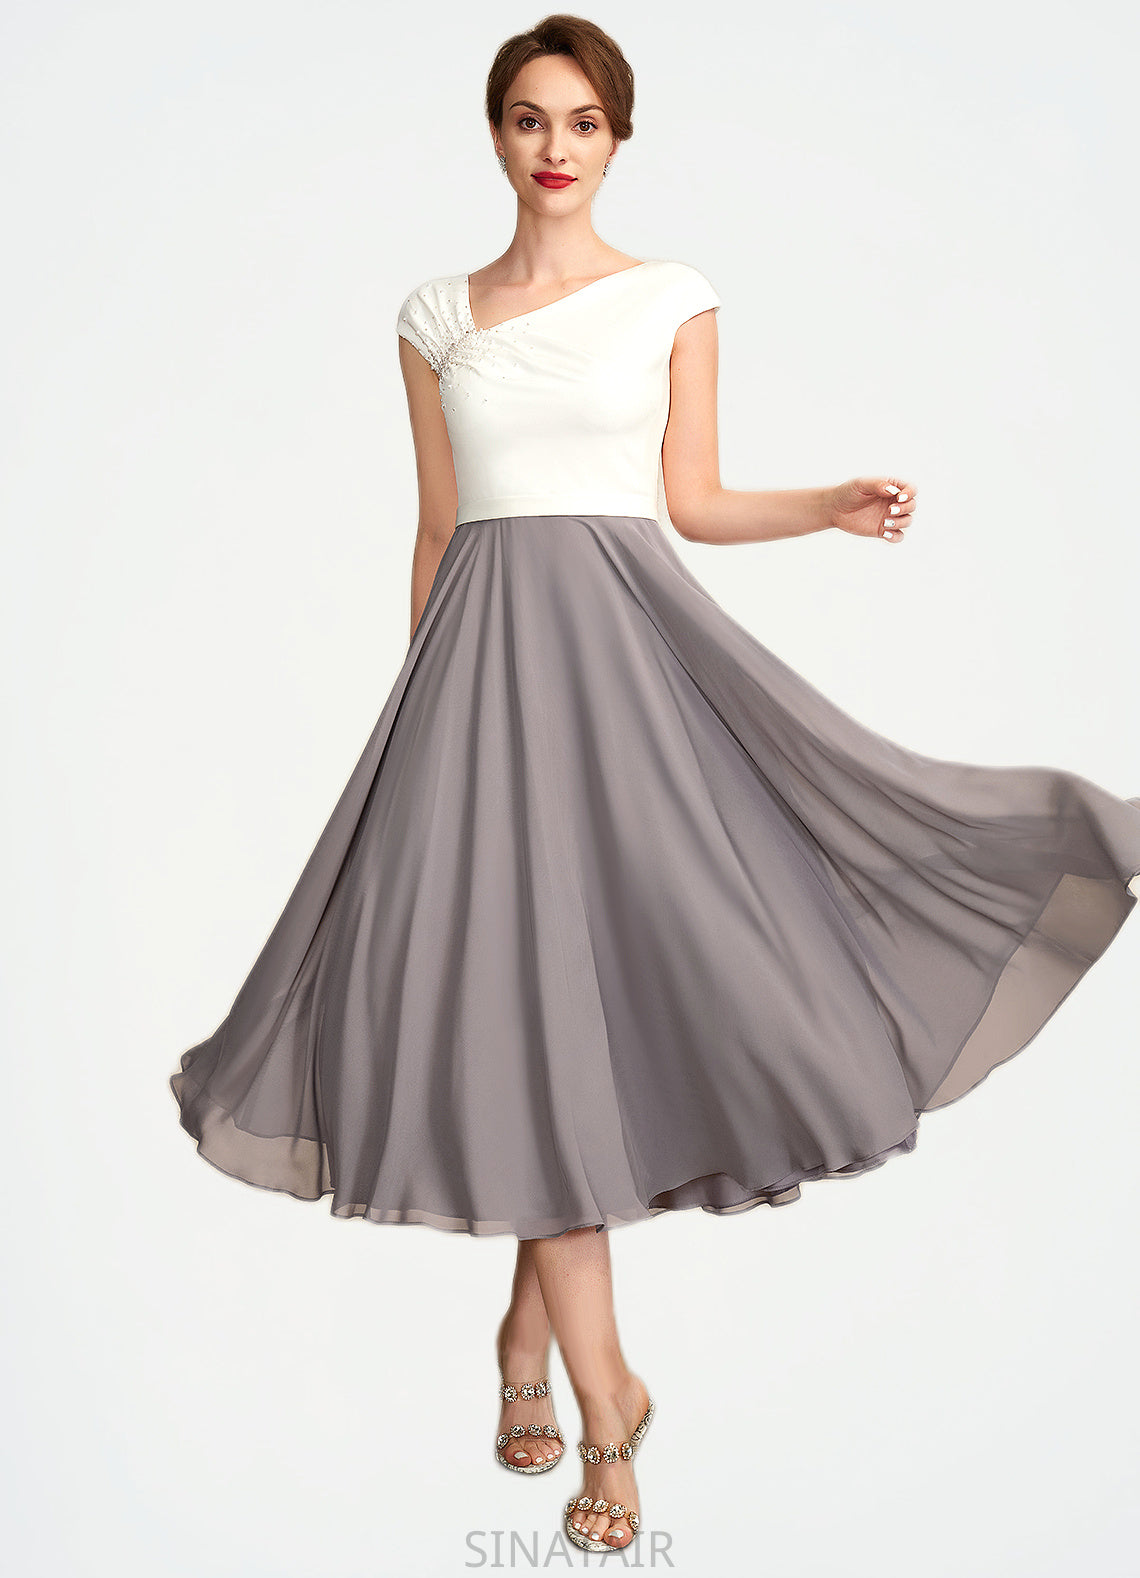 Hazel A-Line V-neck Tea-Length Chiffon Mother of the Bride Dress With Ruffle Beading Sequins DH126P0015016